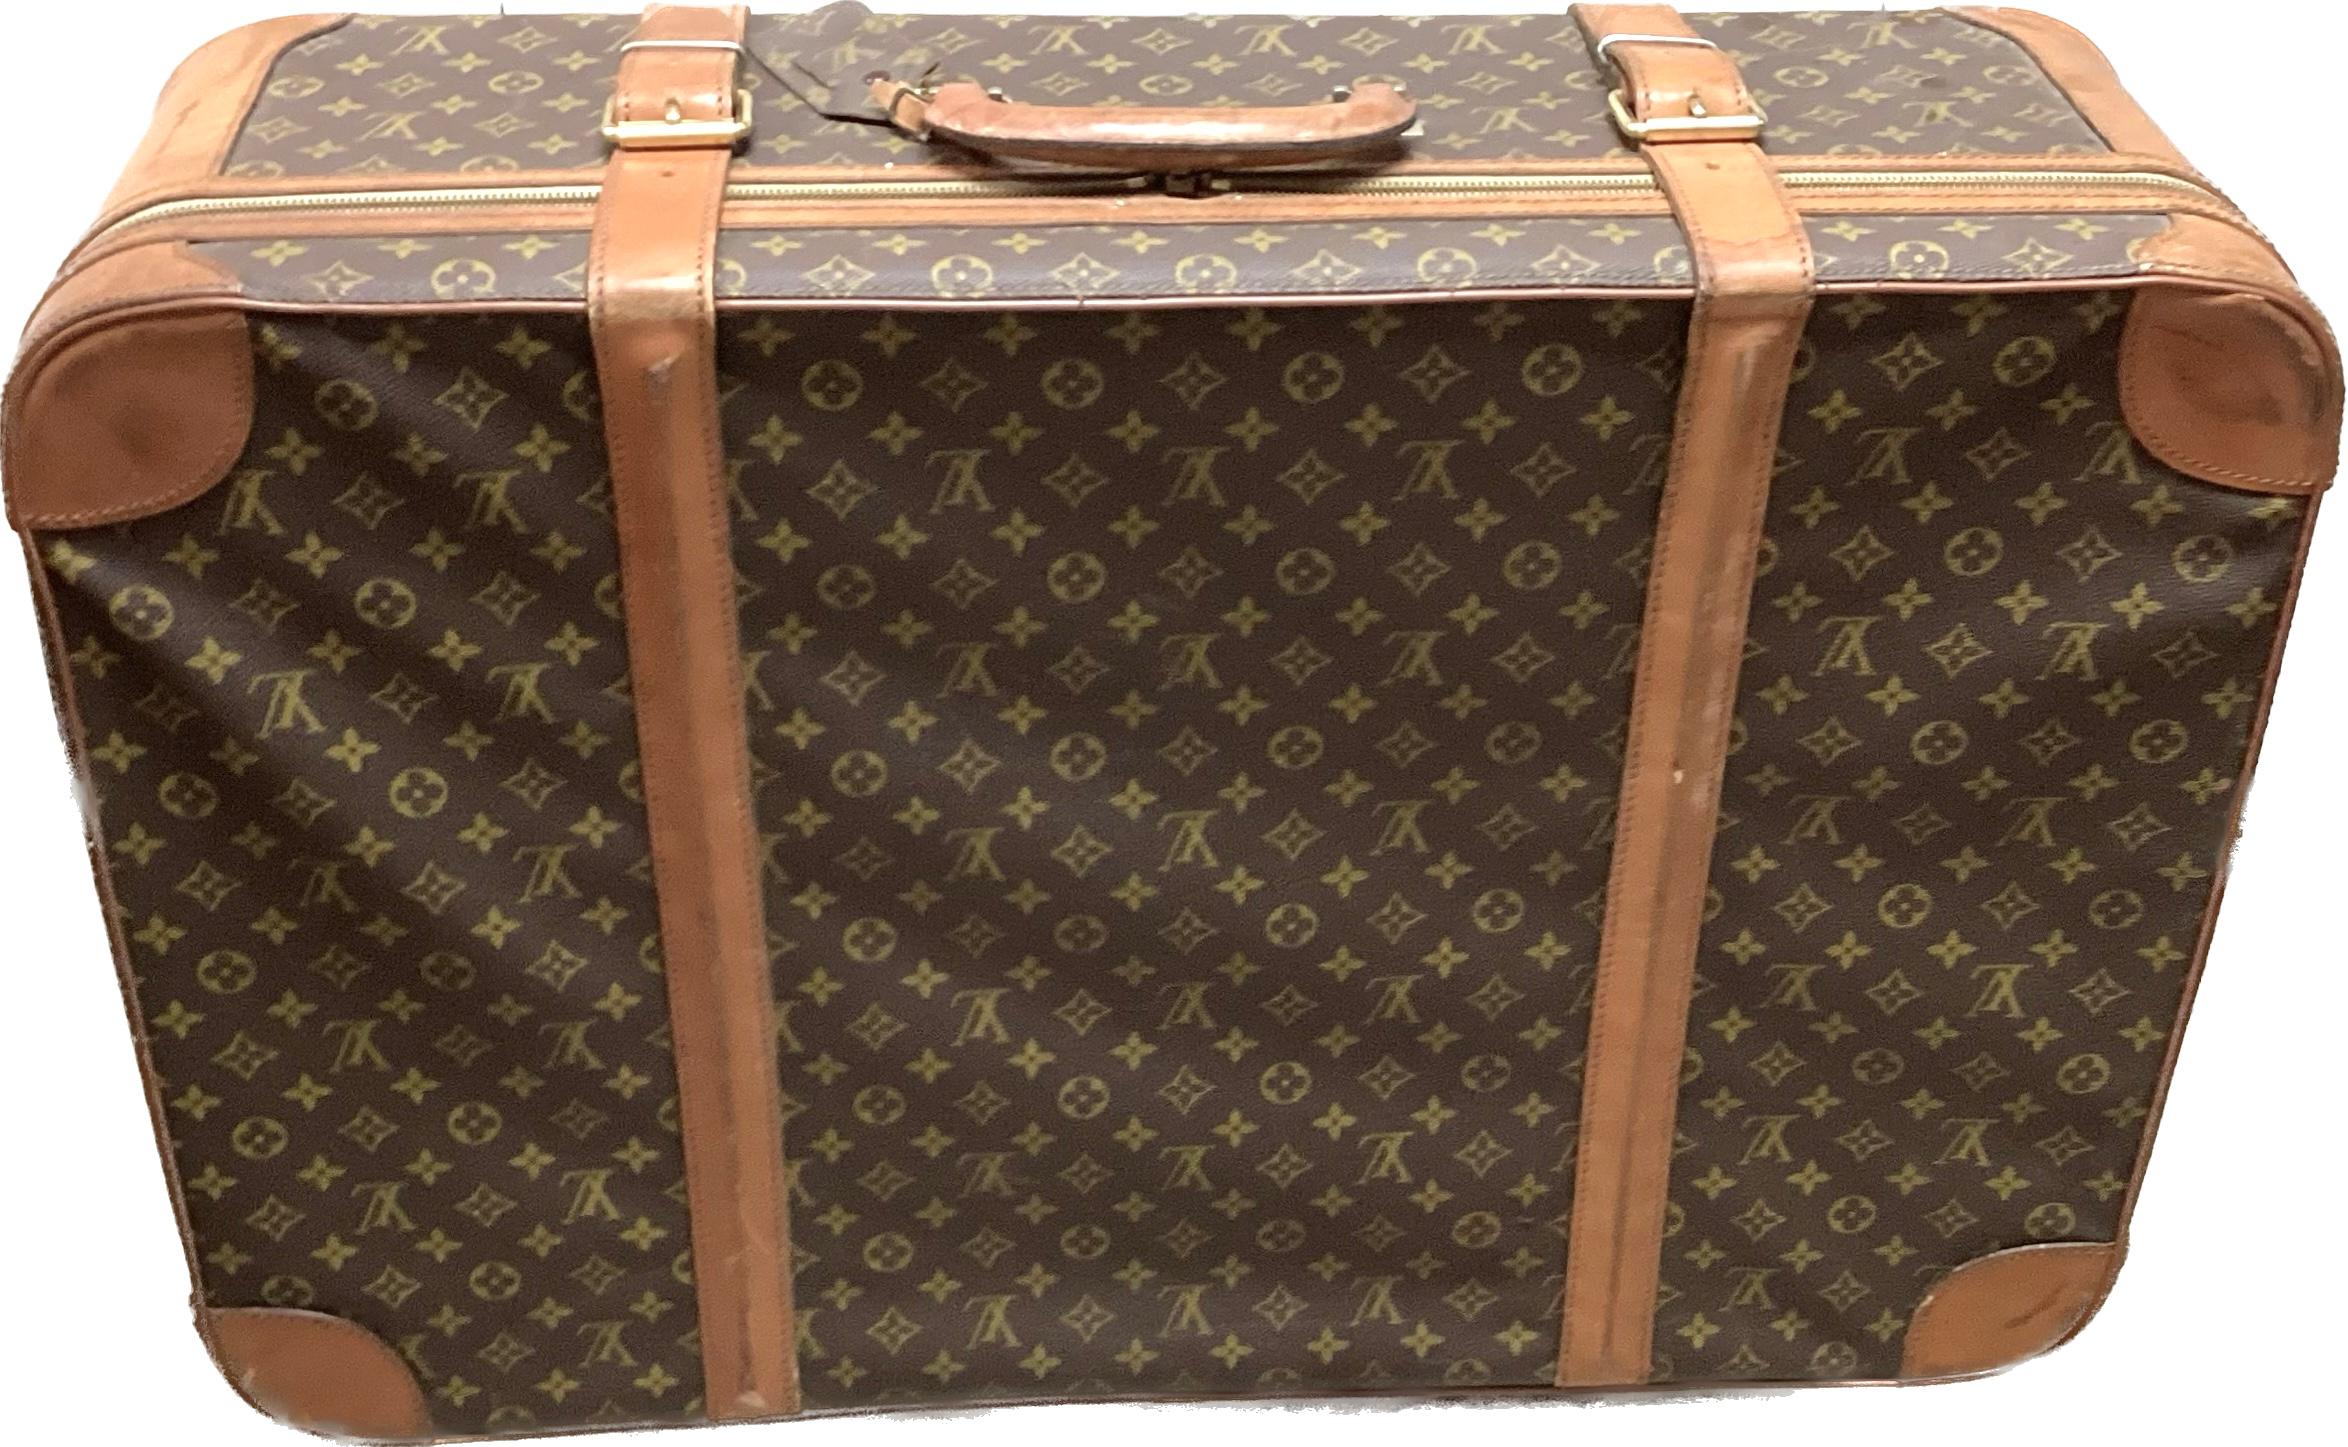 Large Vintage Louis Vuitton leather suitcase. This beautiful piece of luggage features a round top handle and buckle fastenings. Cream colored inside fabric is in good condition and has two side pockets and buckle fastenings. Lock and key included.